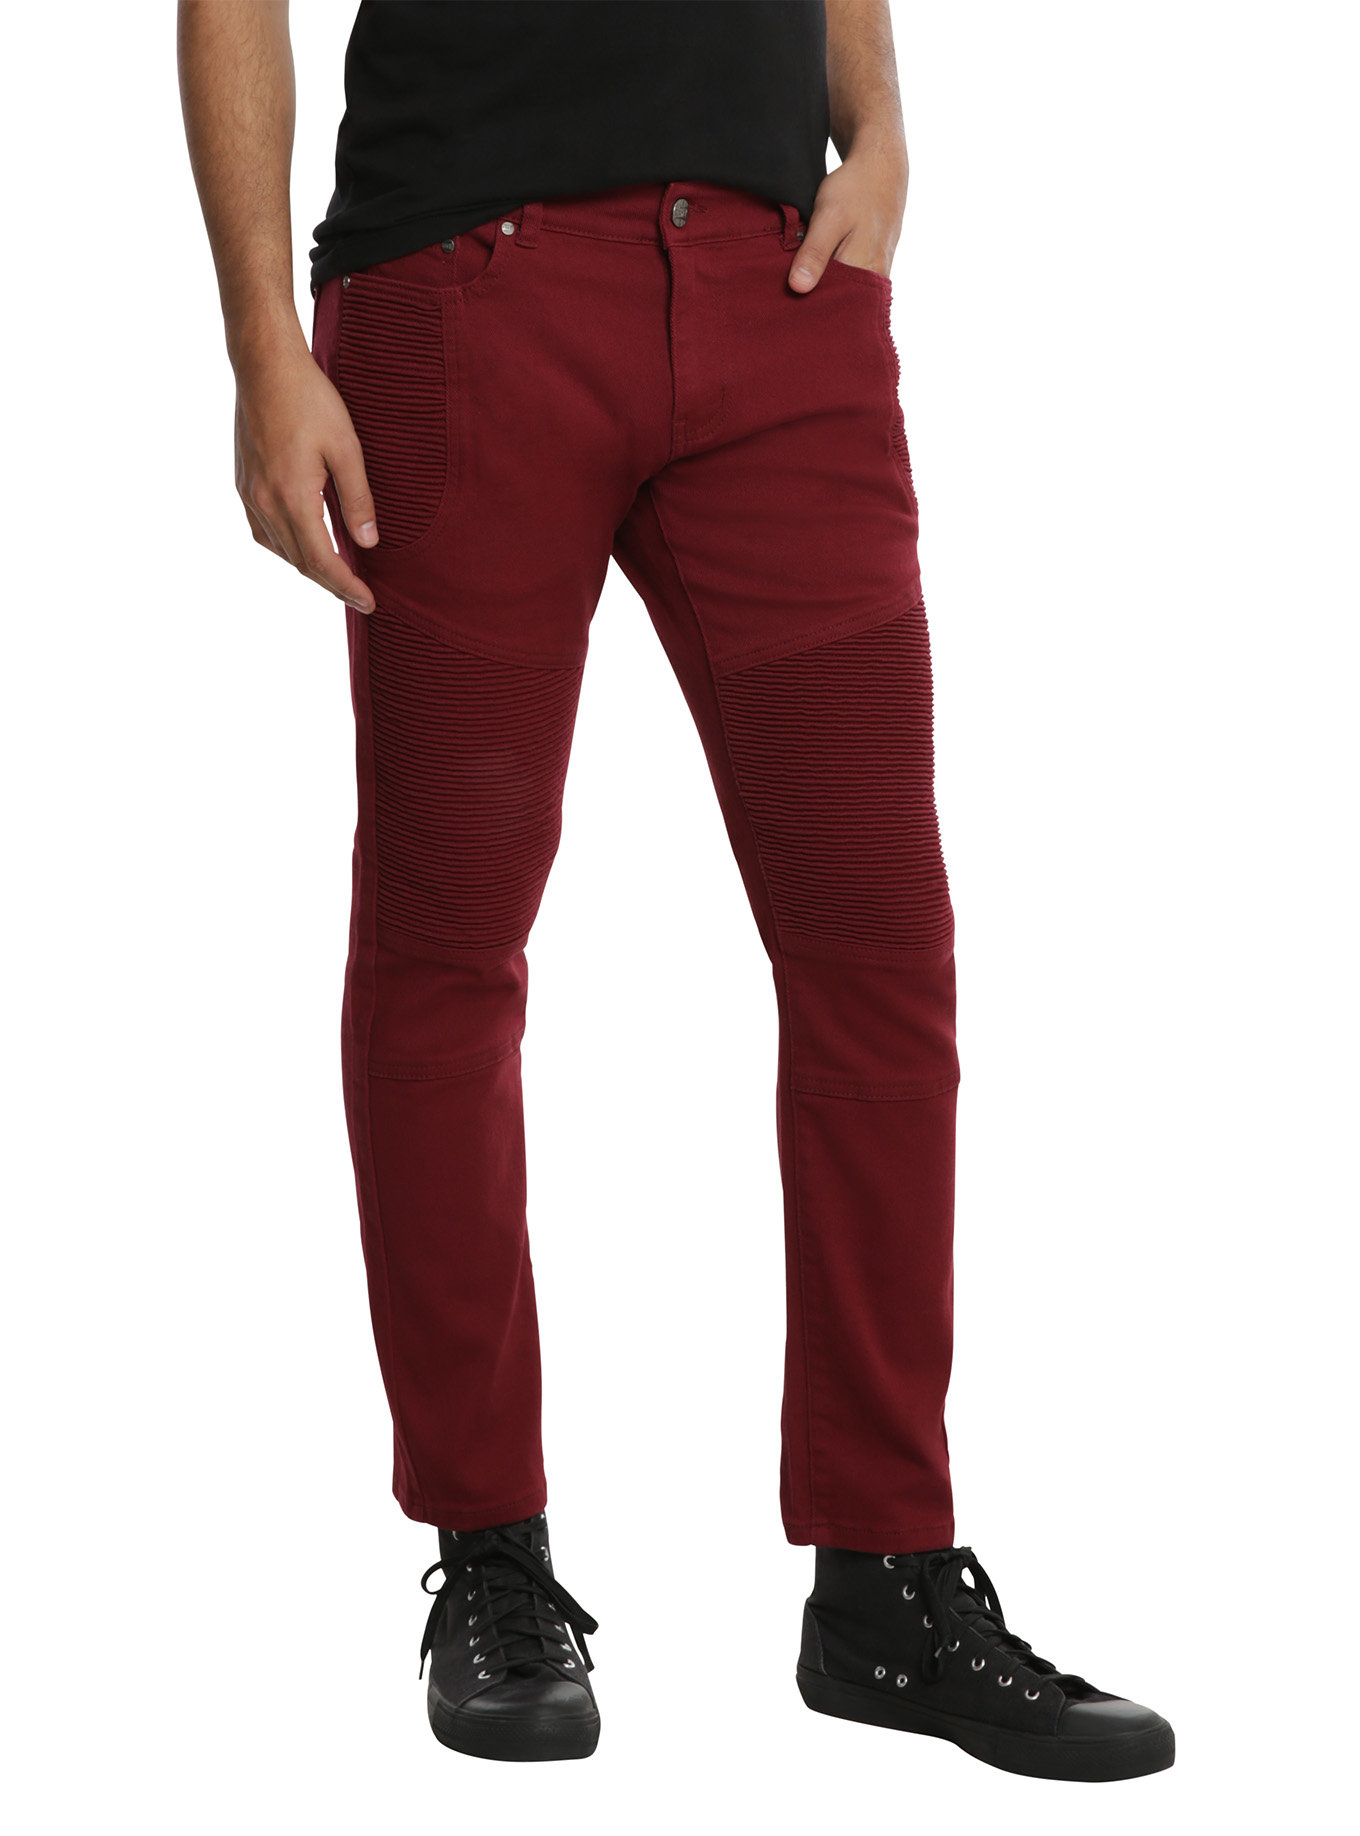 red jeans product actions BGFORUF